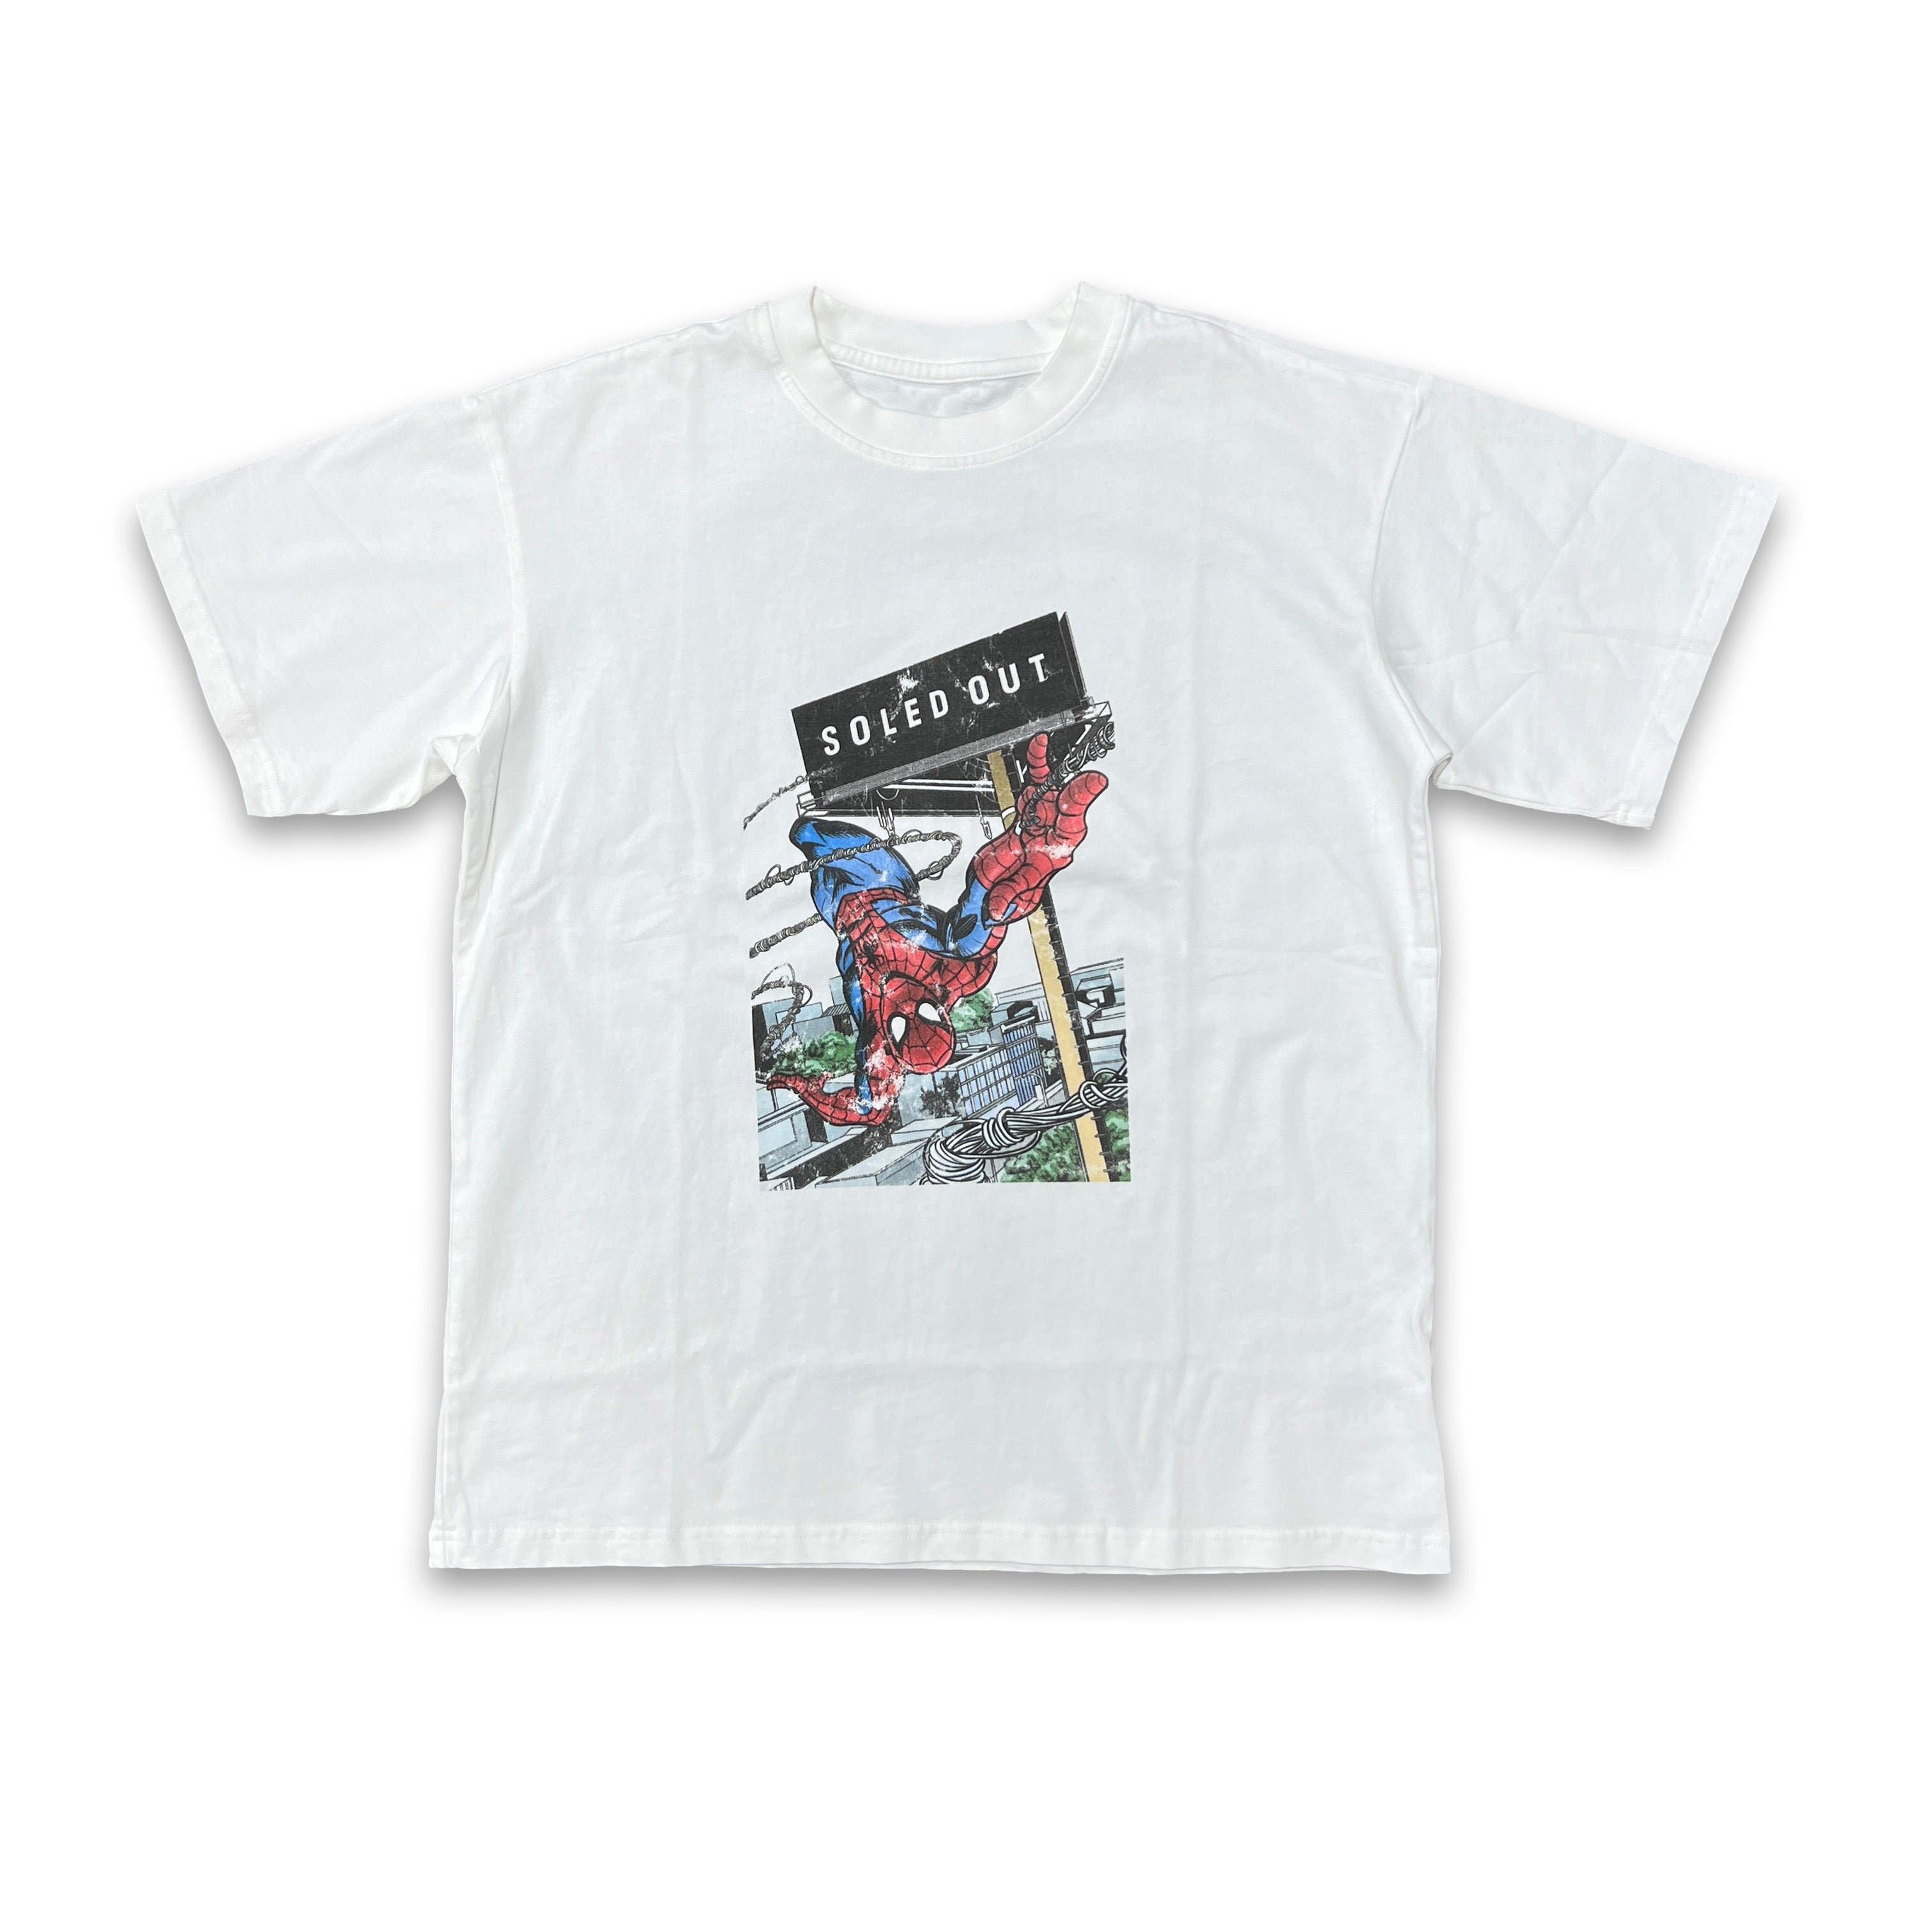 Soled Out T-Shirt "SPIDERMAN" White New Size M